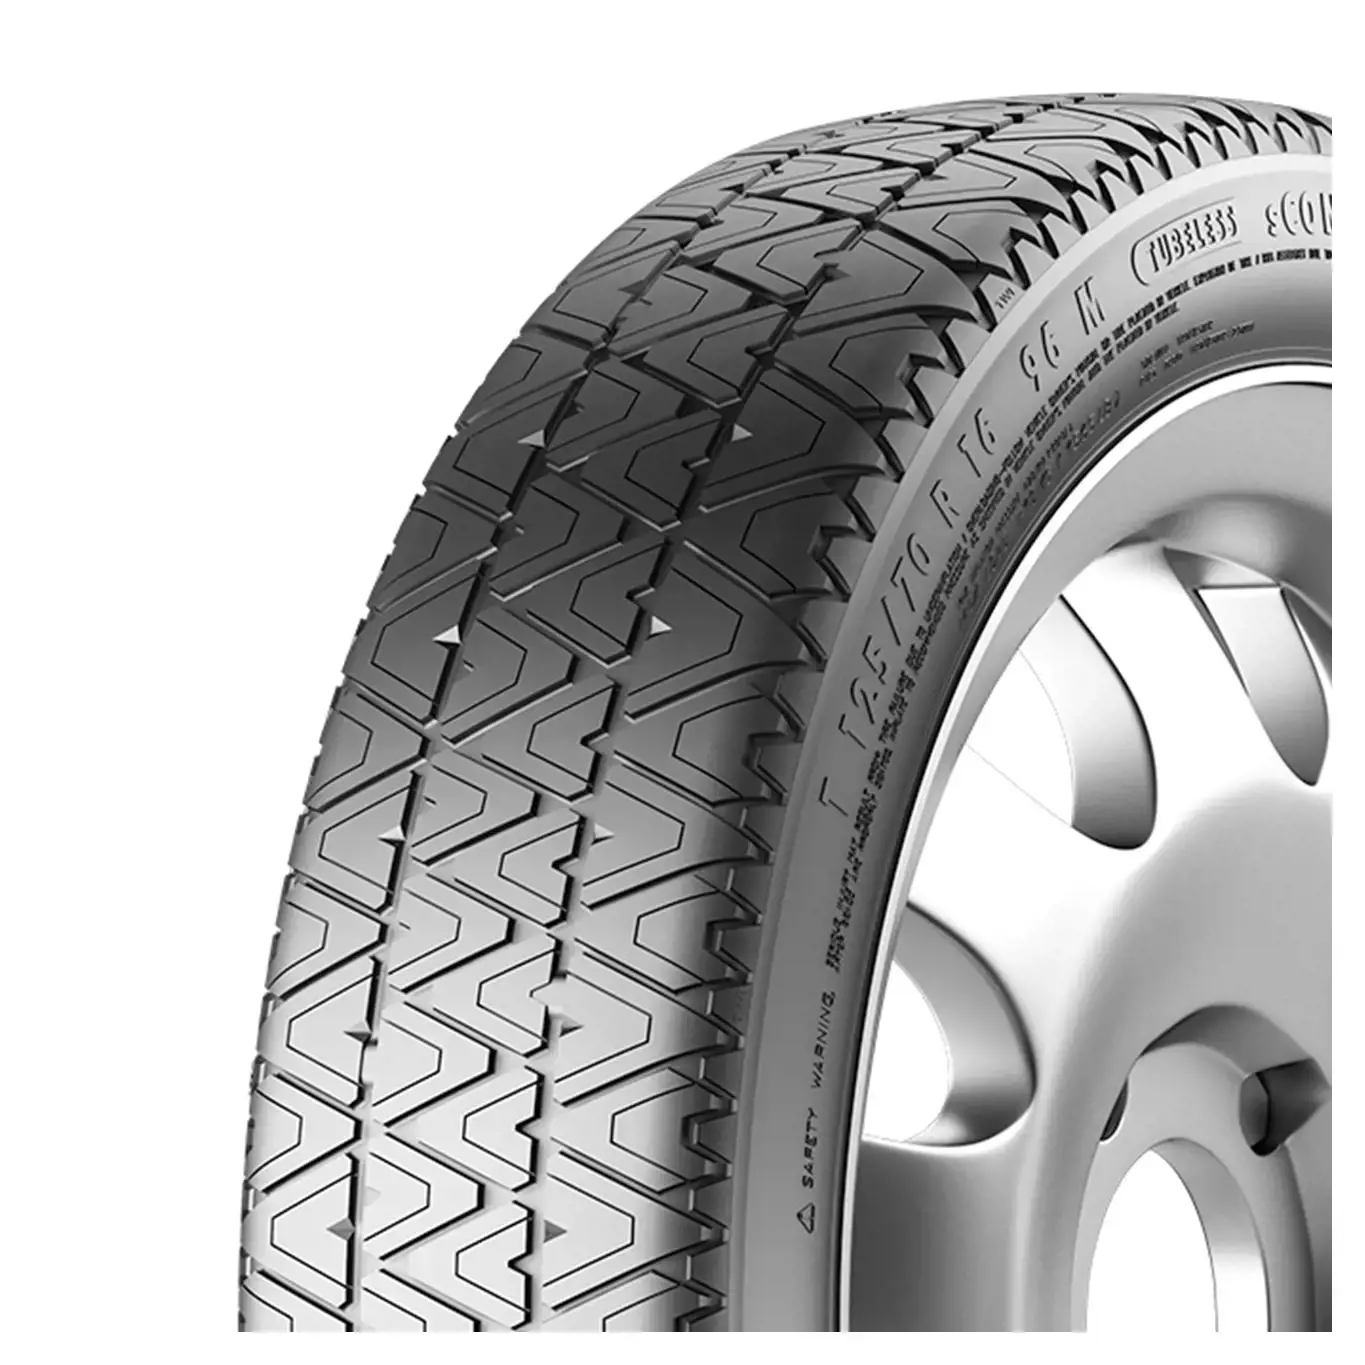 T125/80 R17 99M sContact